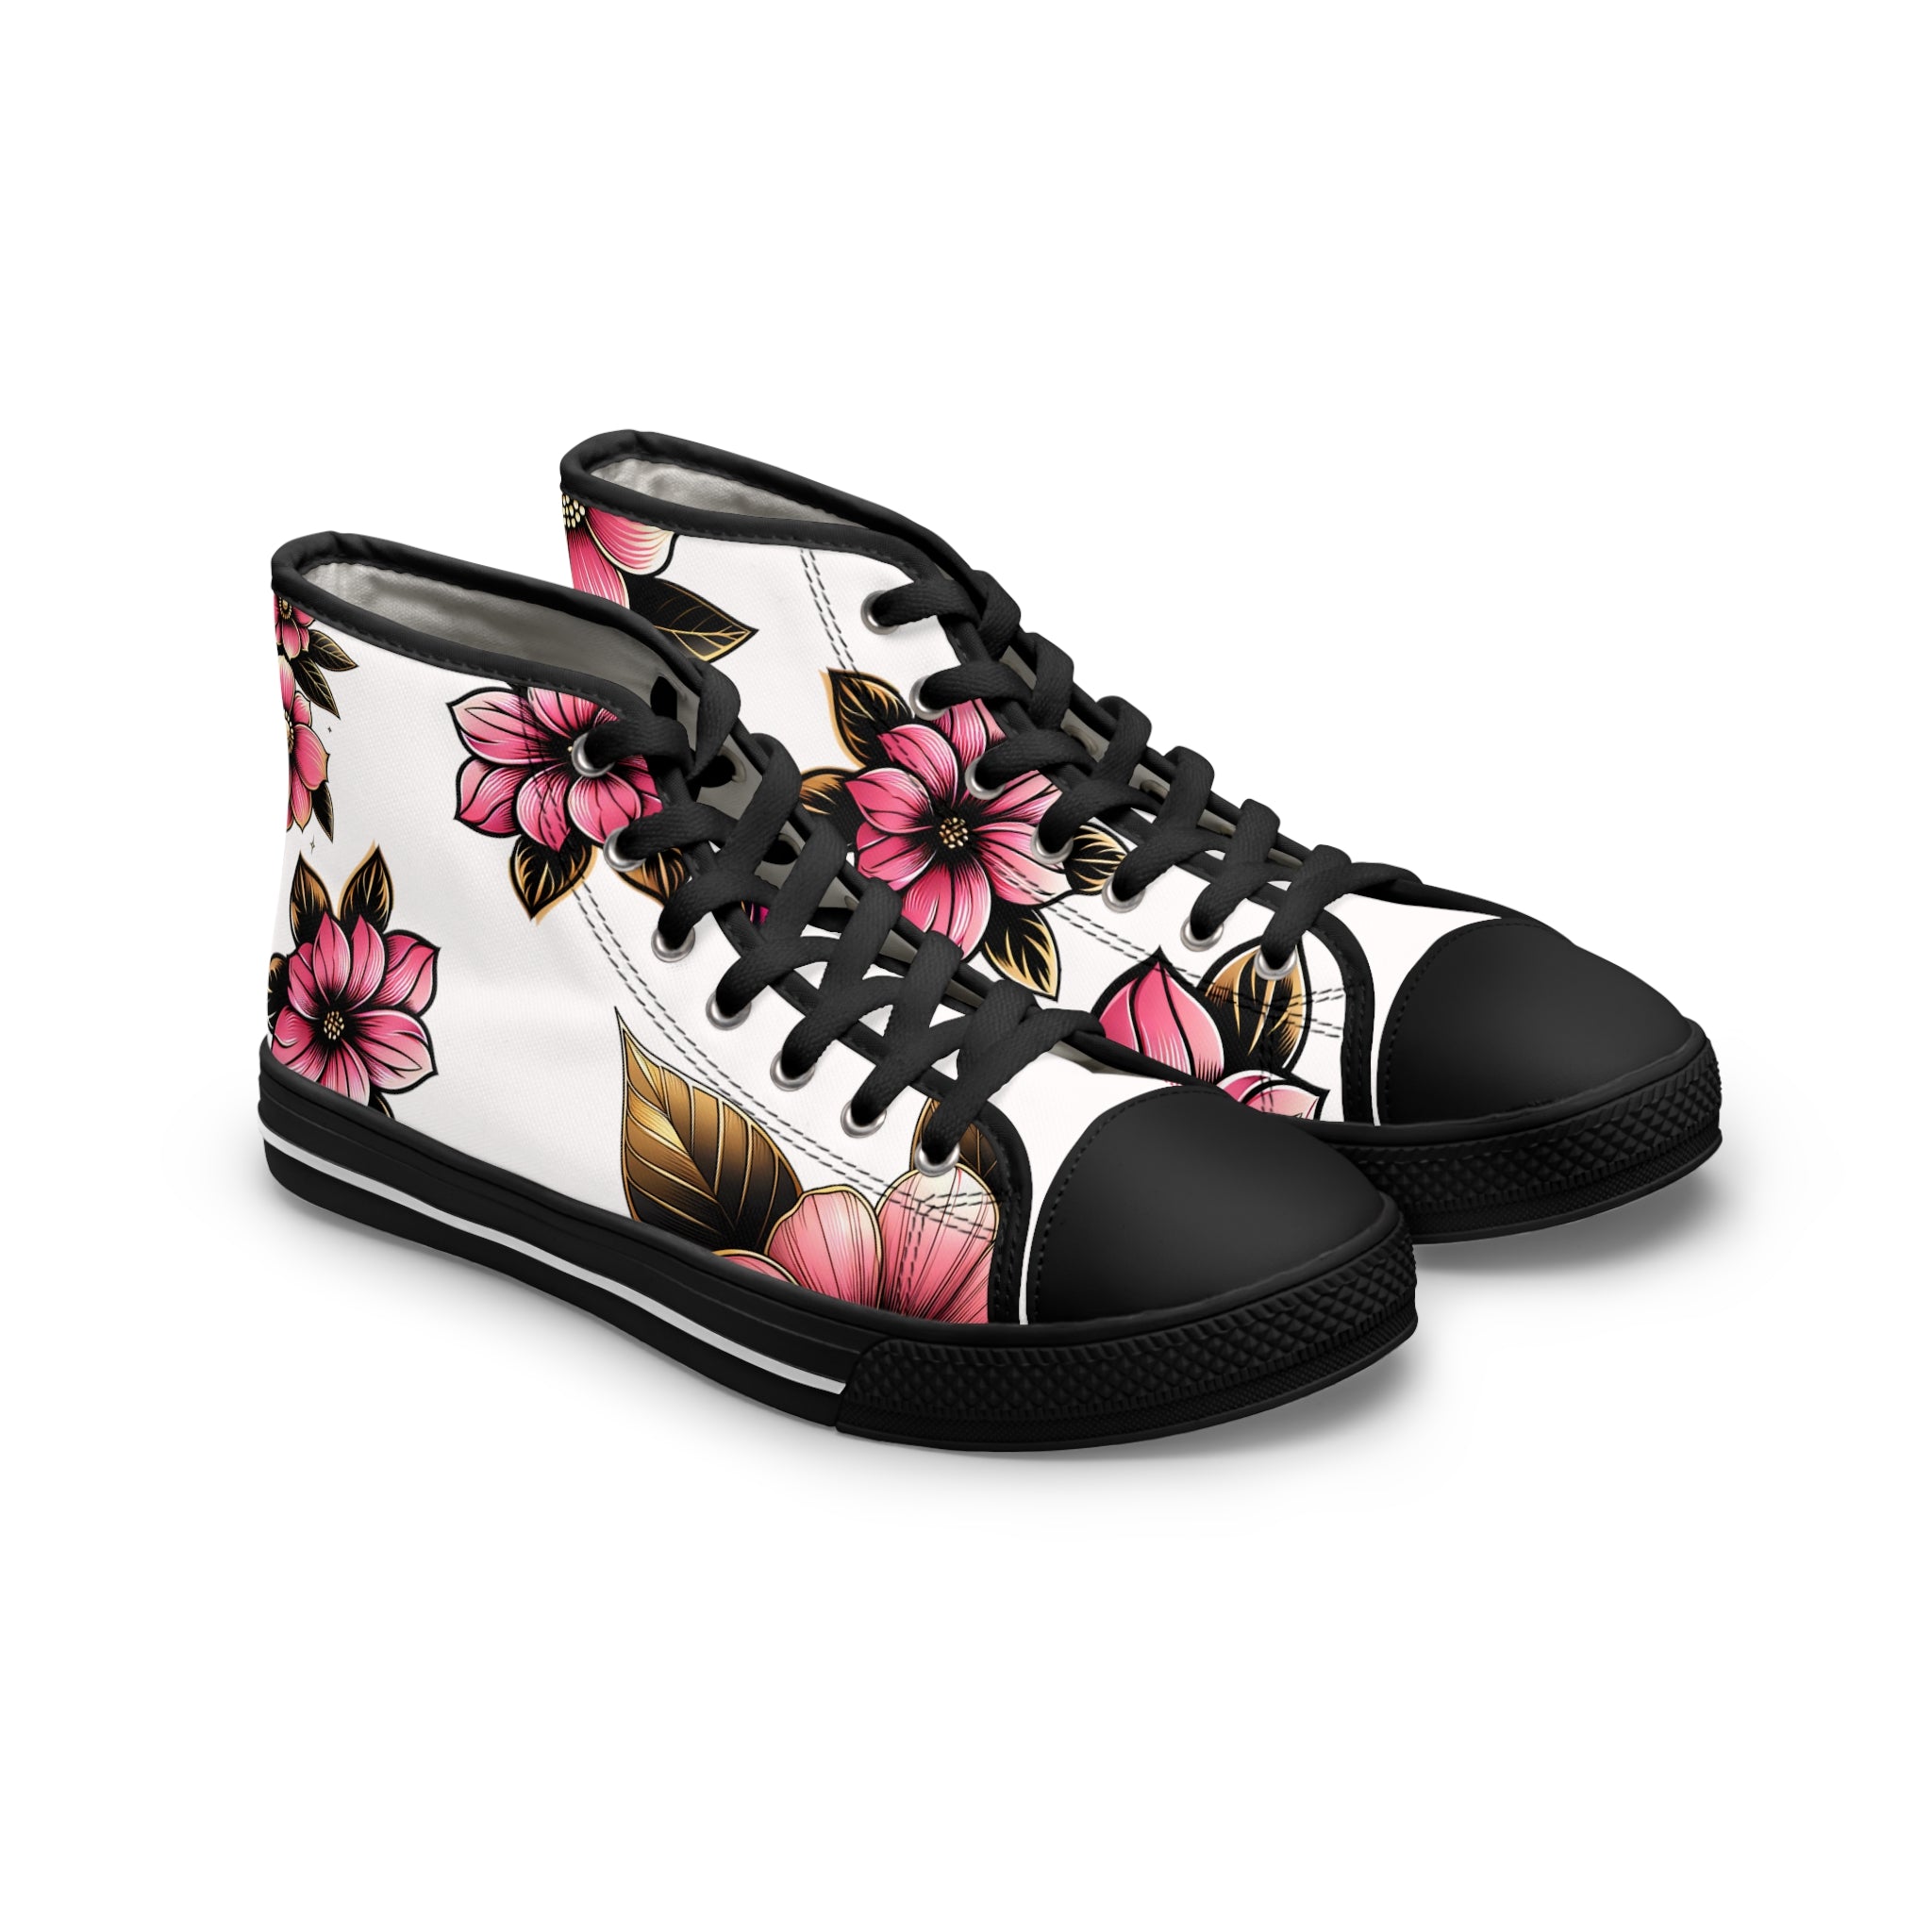 Lilly Amour Rose - Women's High Top Shoe's